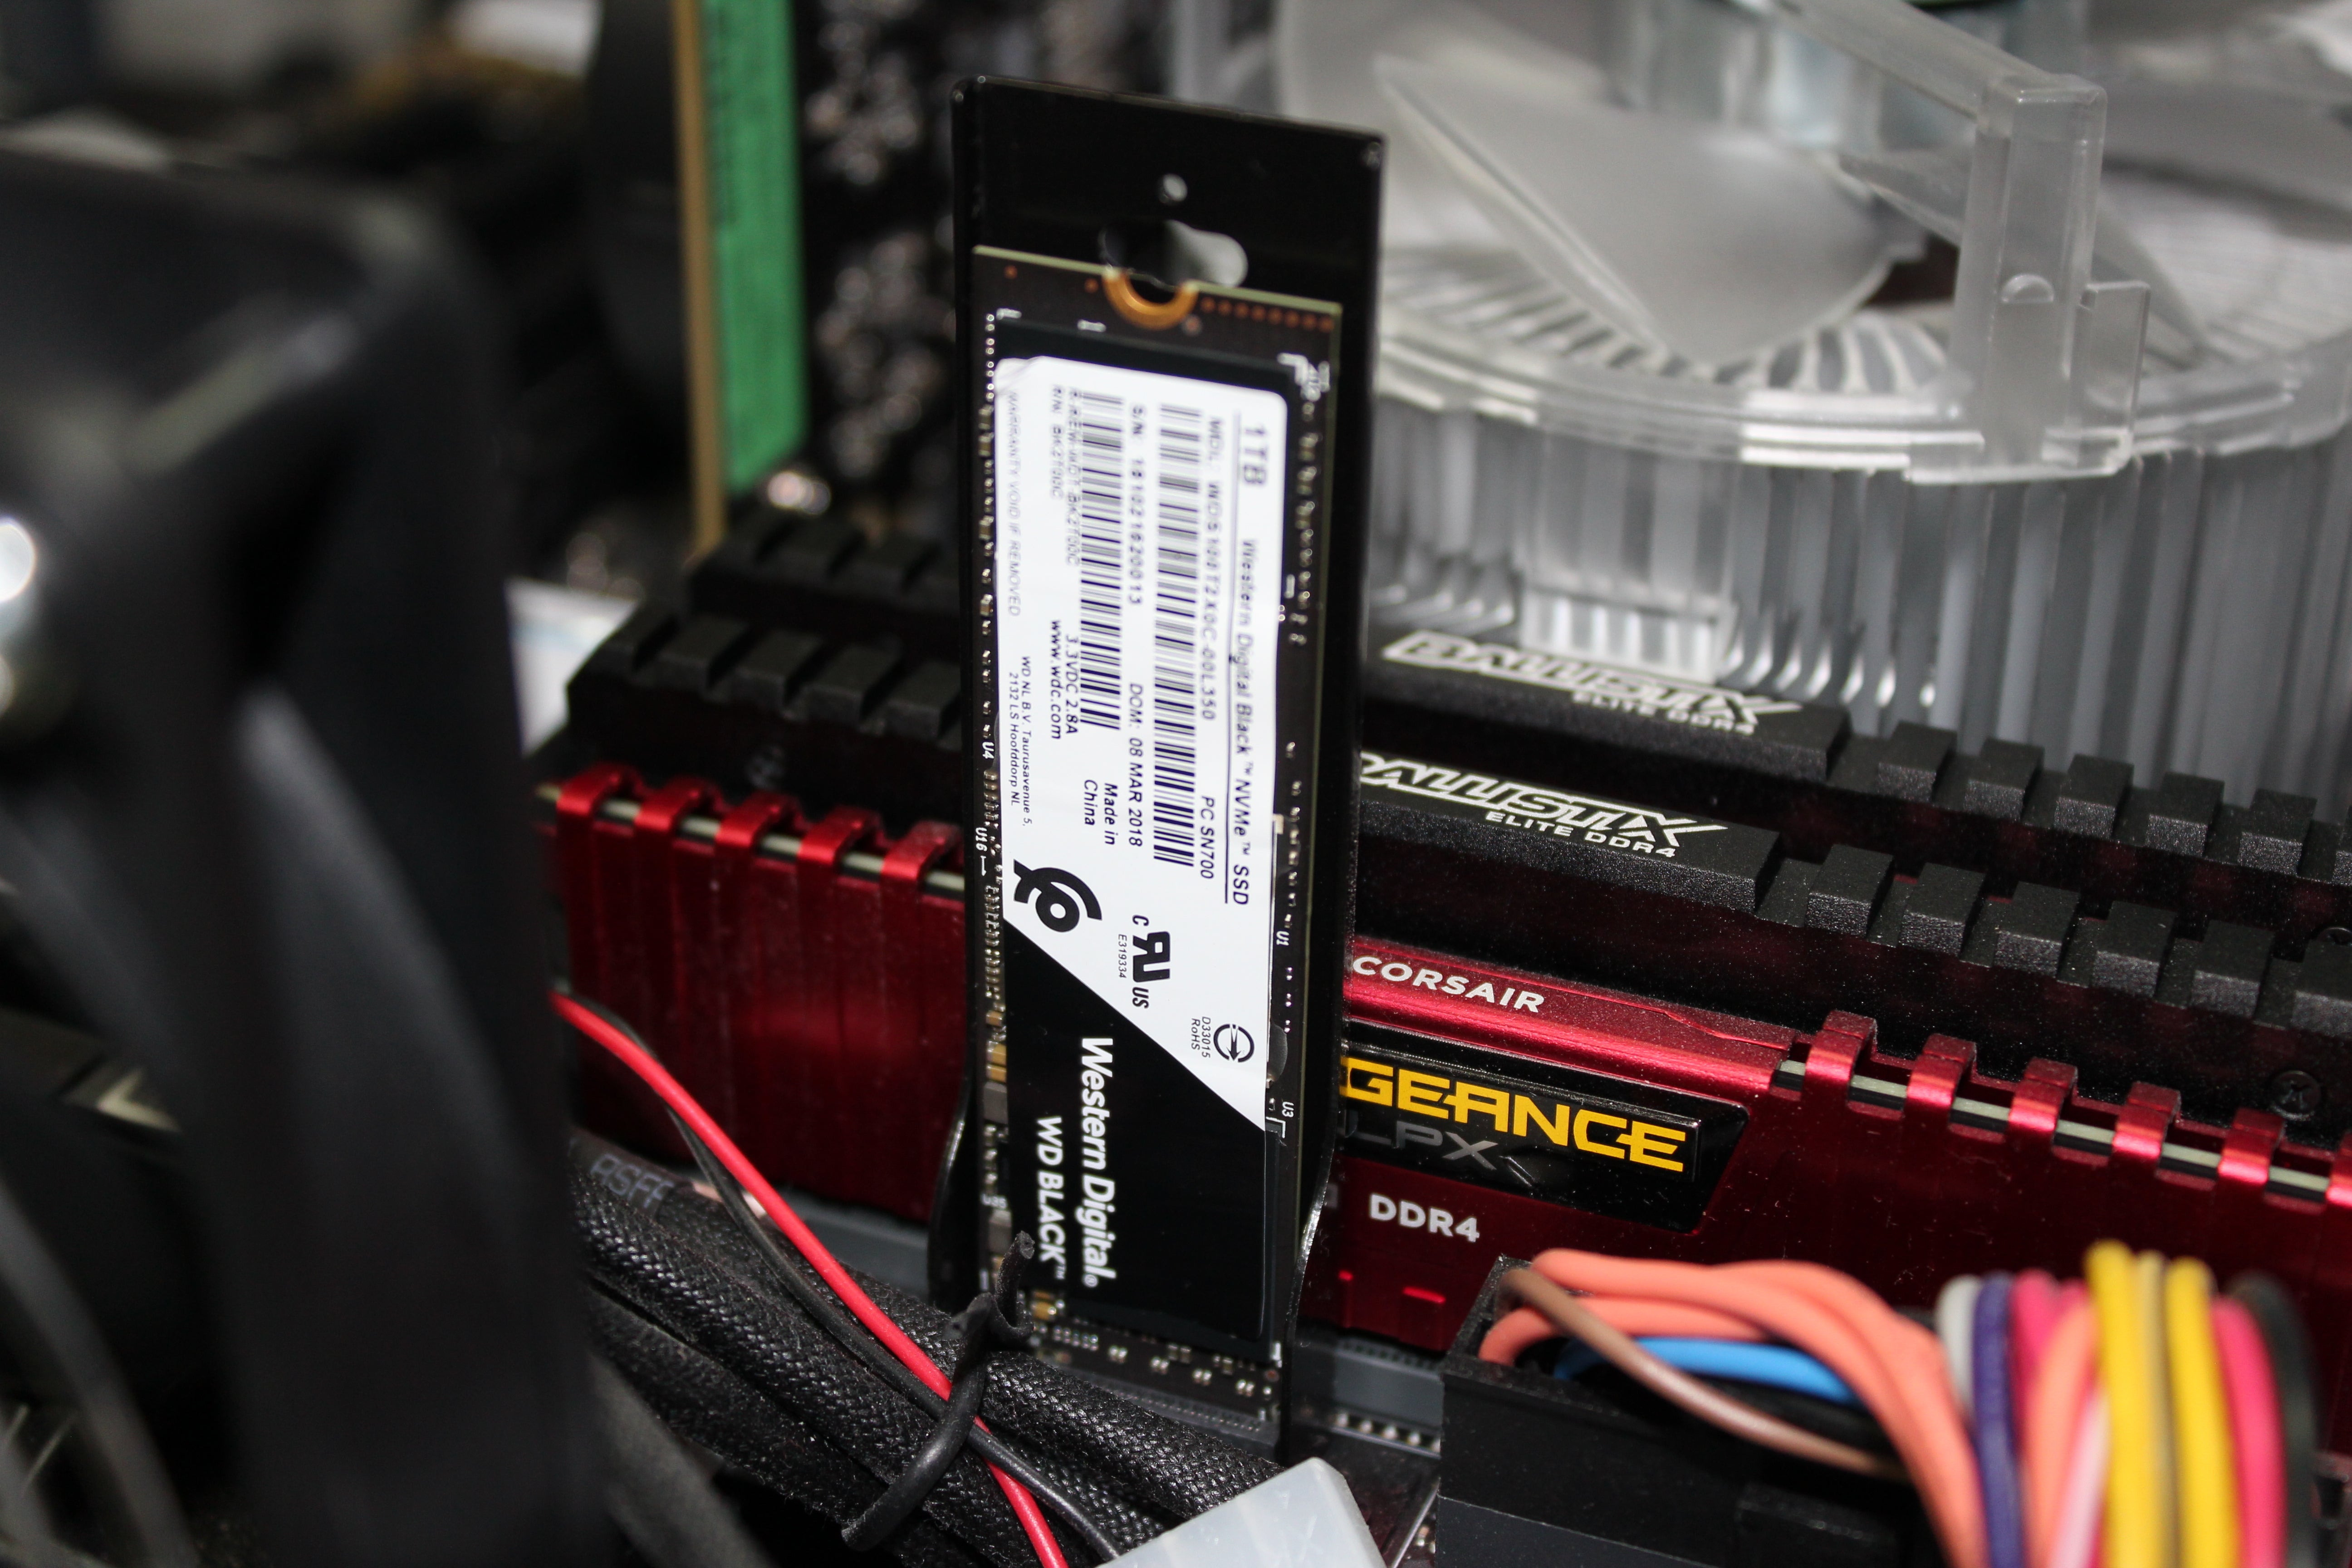 NVMe SSDs Everything you need to know about this insanely